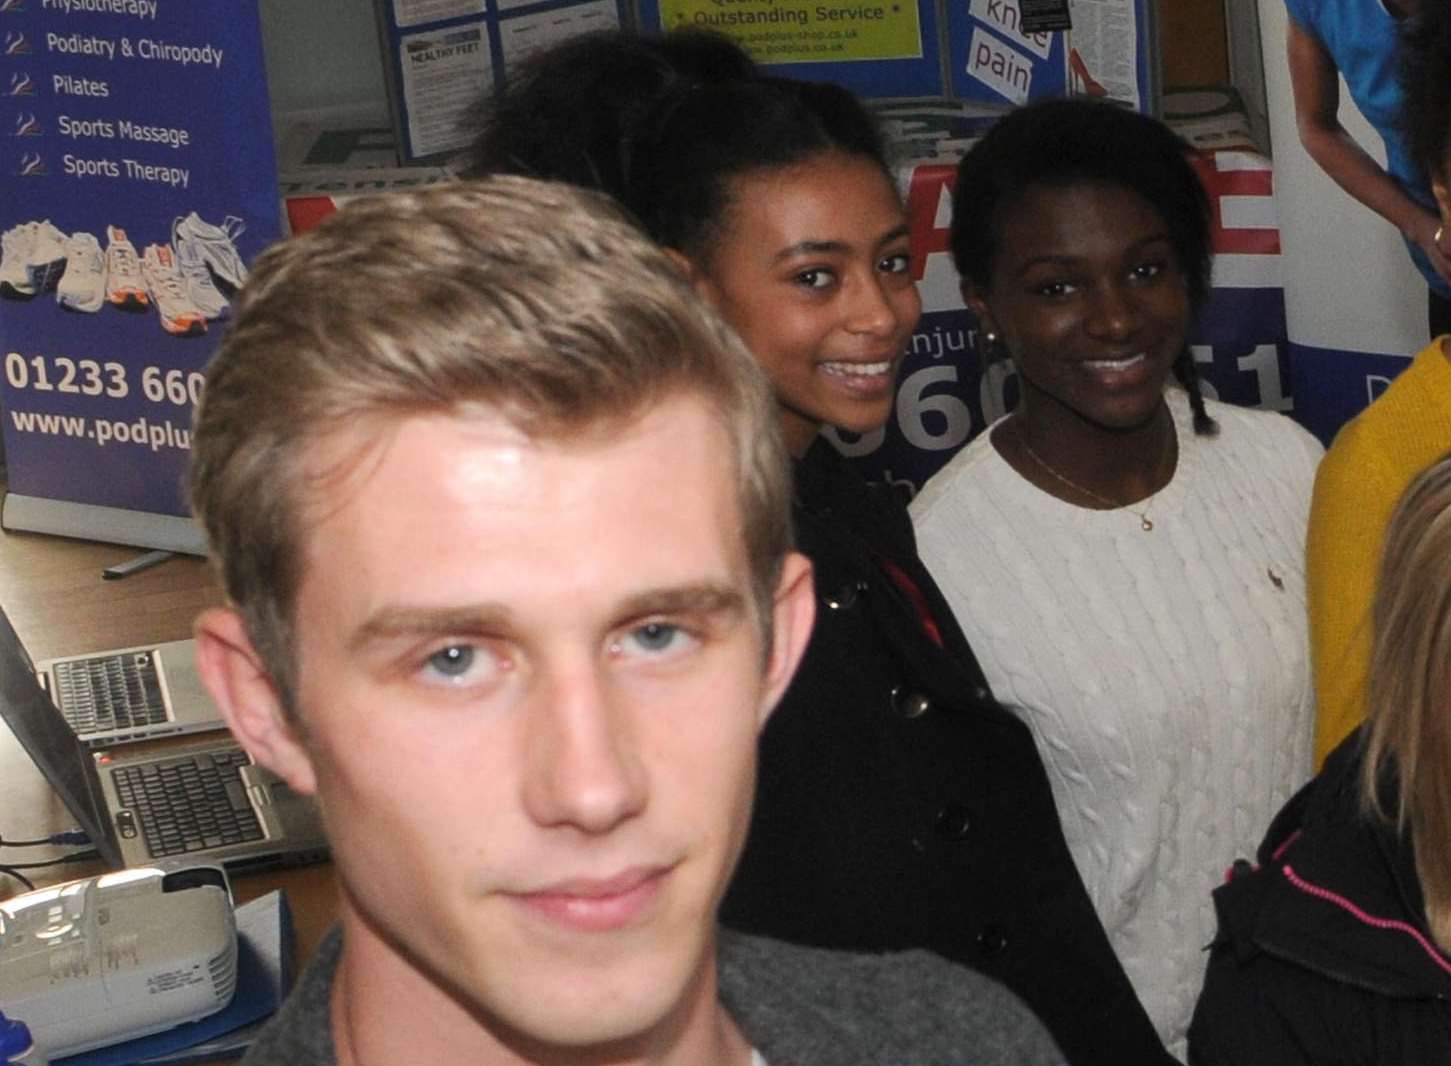 Shannon Hylton and Dina Asher-Smith posing with Jack Green in 2013.